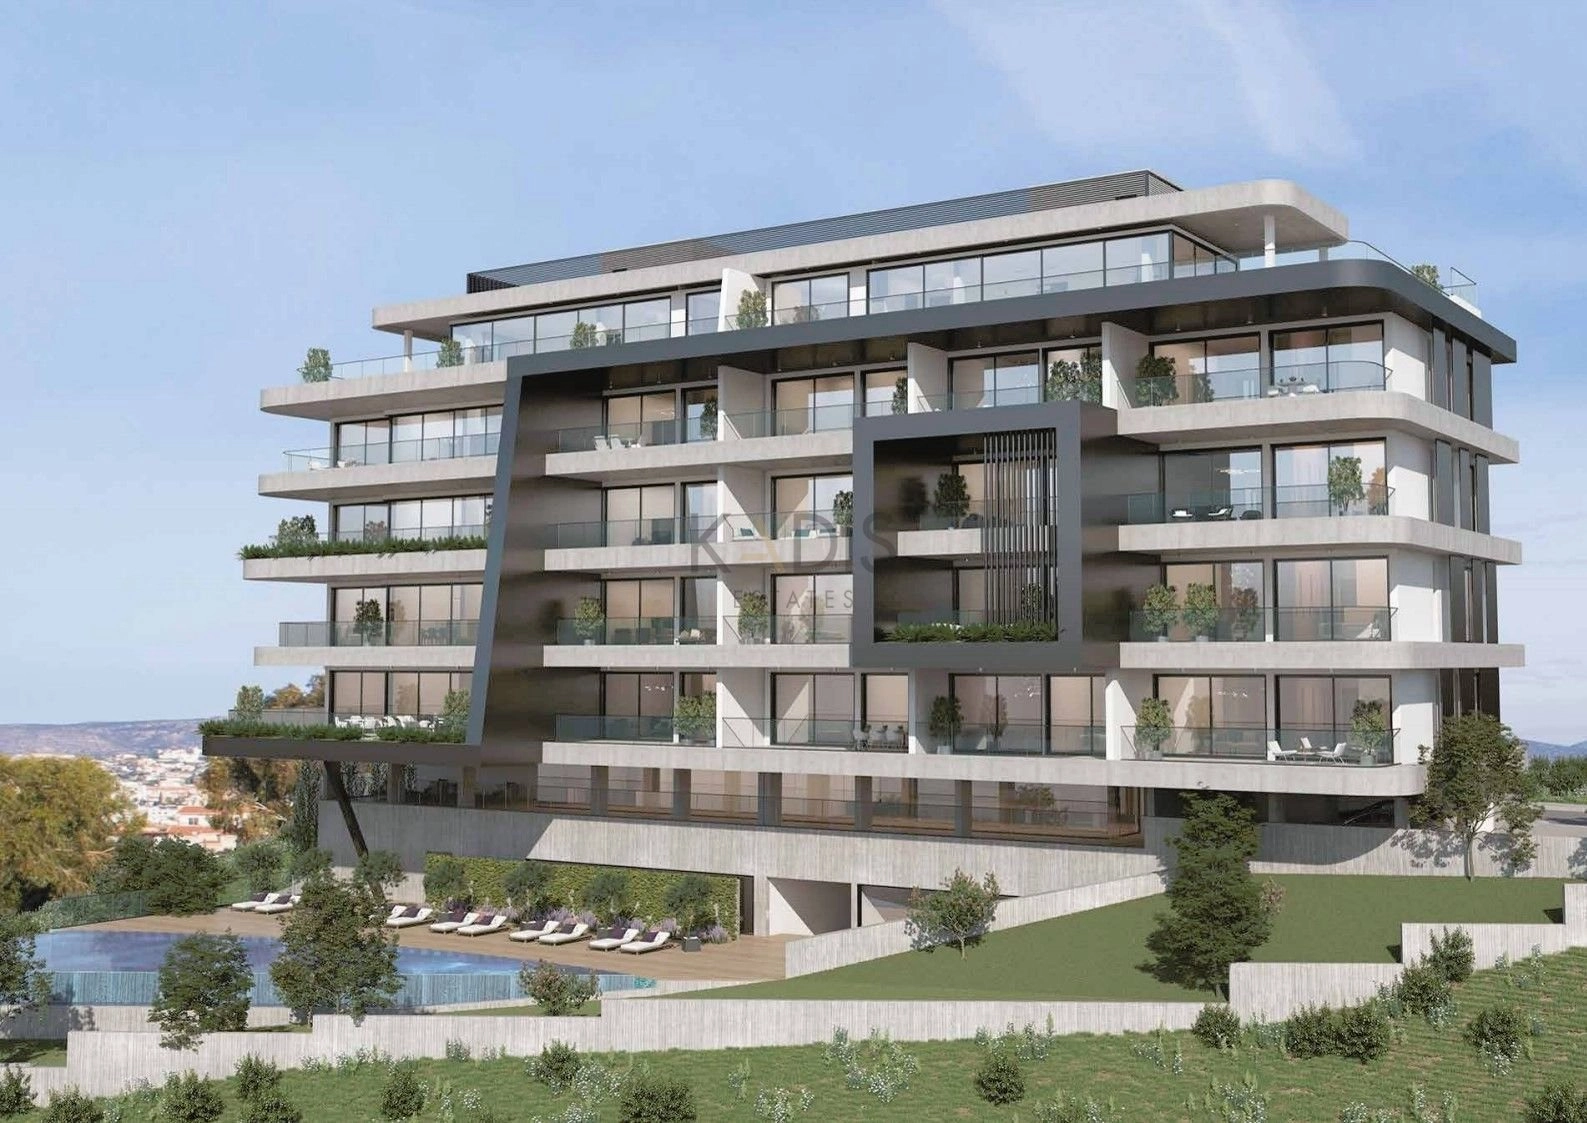 4 Bedroom Apartment for Sale in Limassol – Agia Fyla